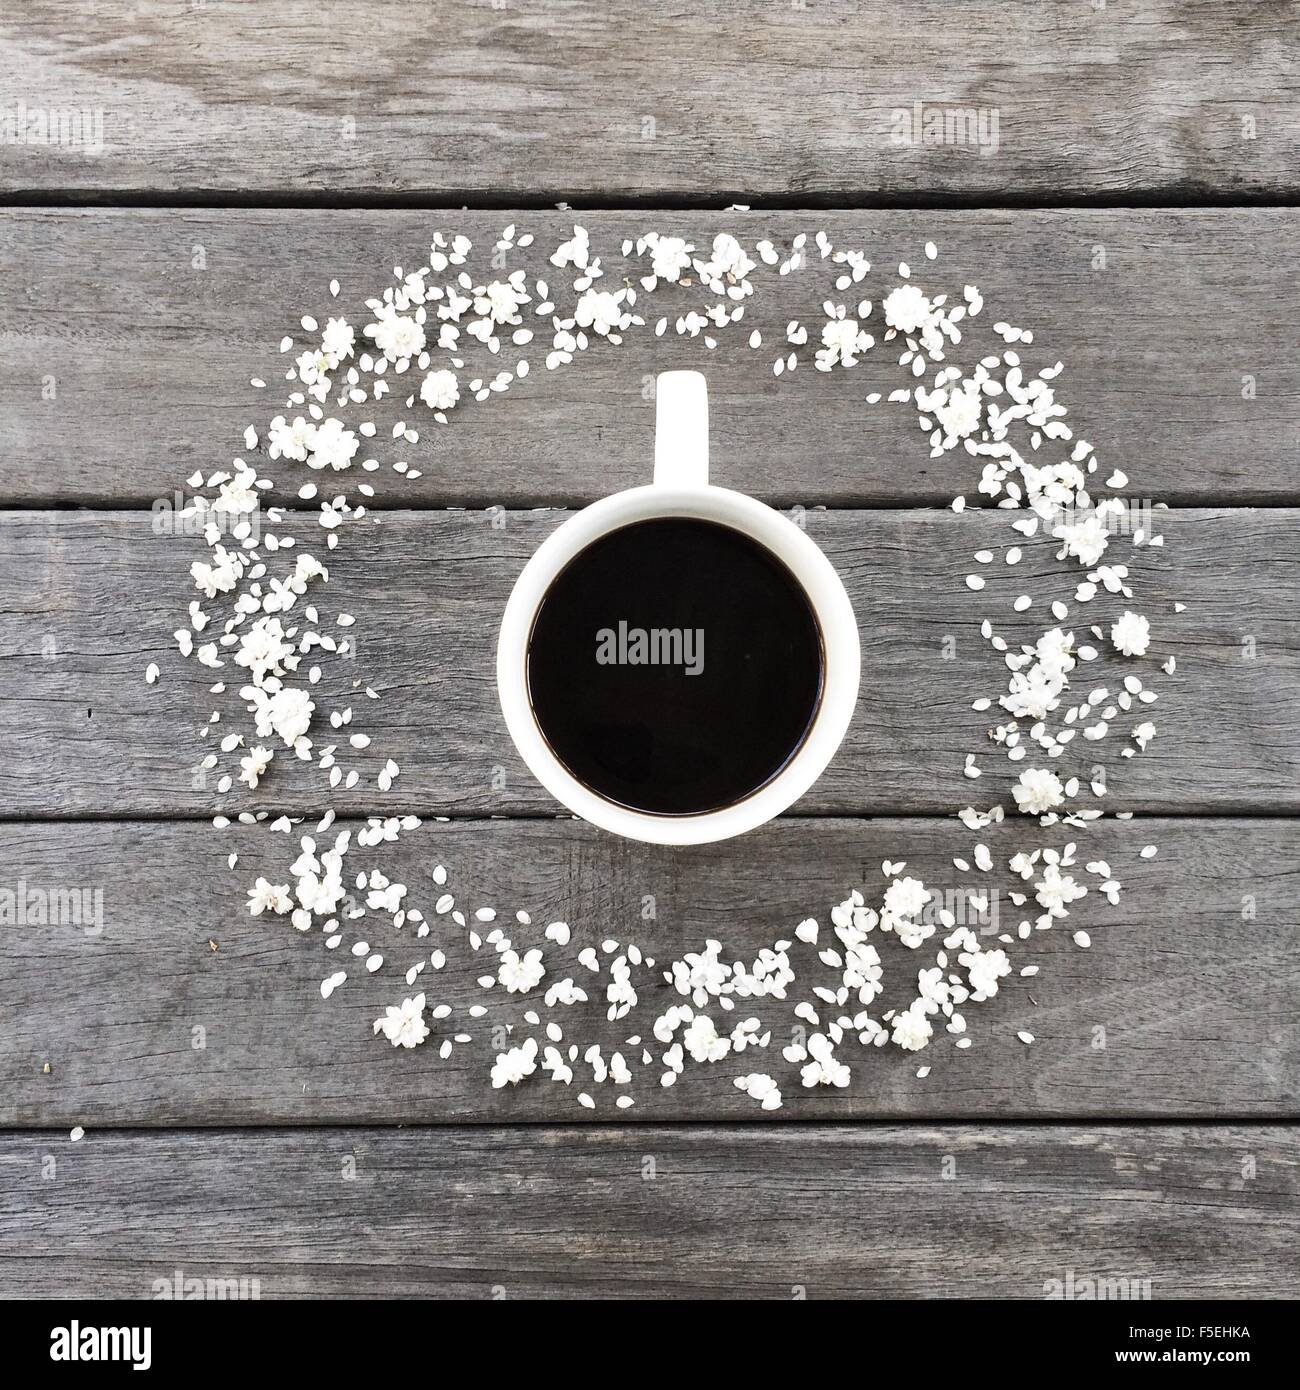 Mug of coffee surrounded by a circle of white flower petals Stock Photo